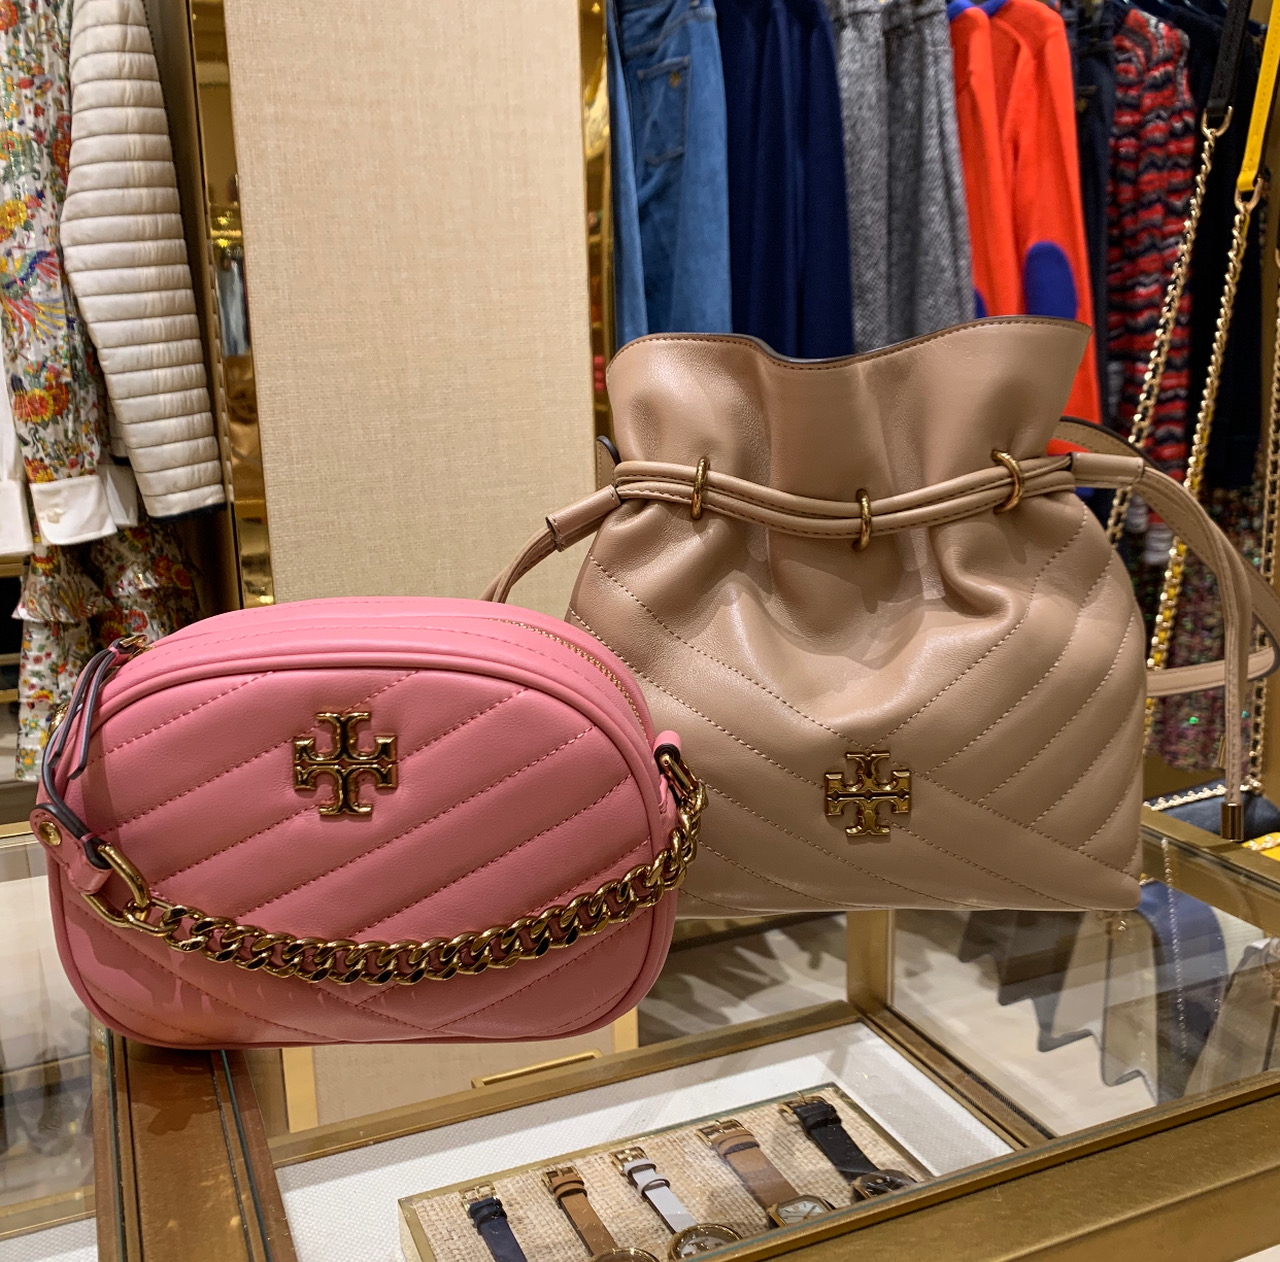 Tory Burch Spring Event | Save Up To 30% Off! - The Double Take Girls